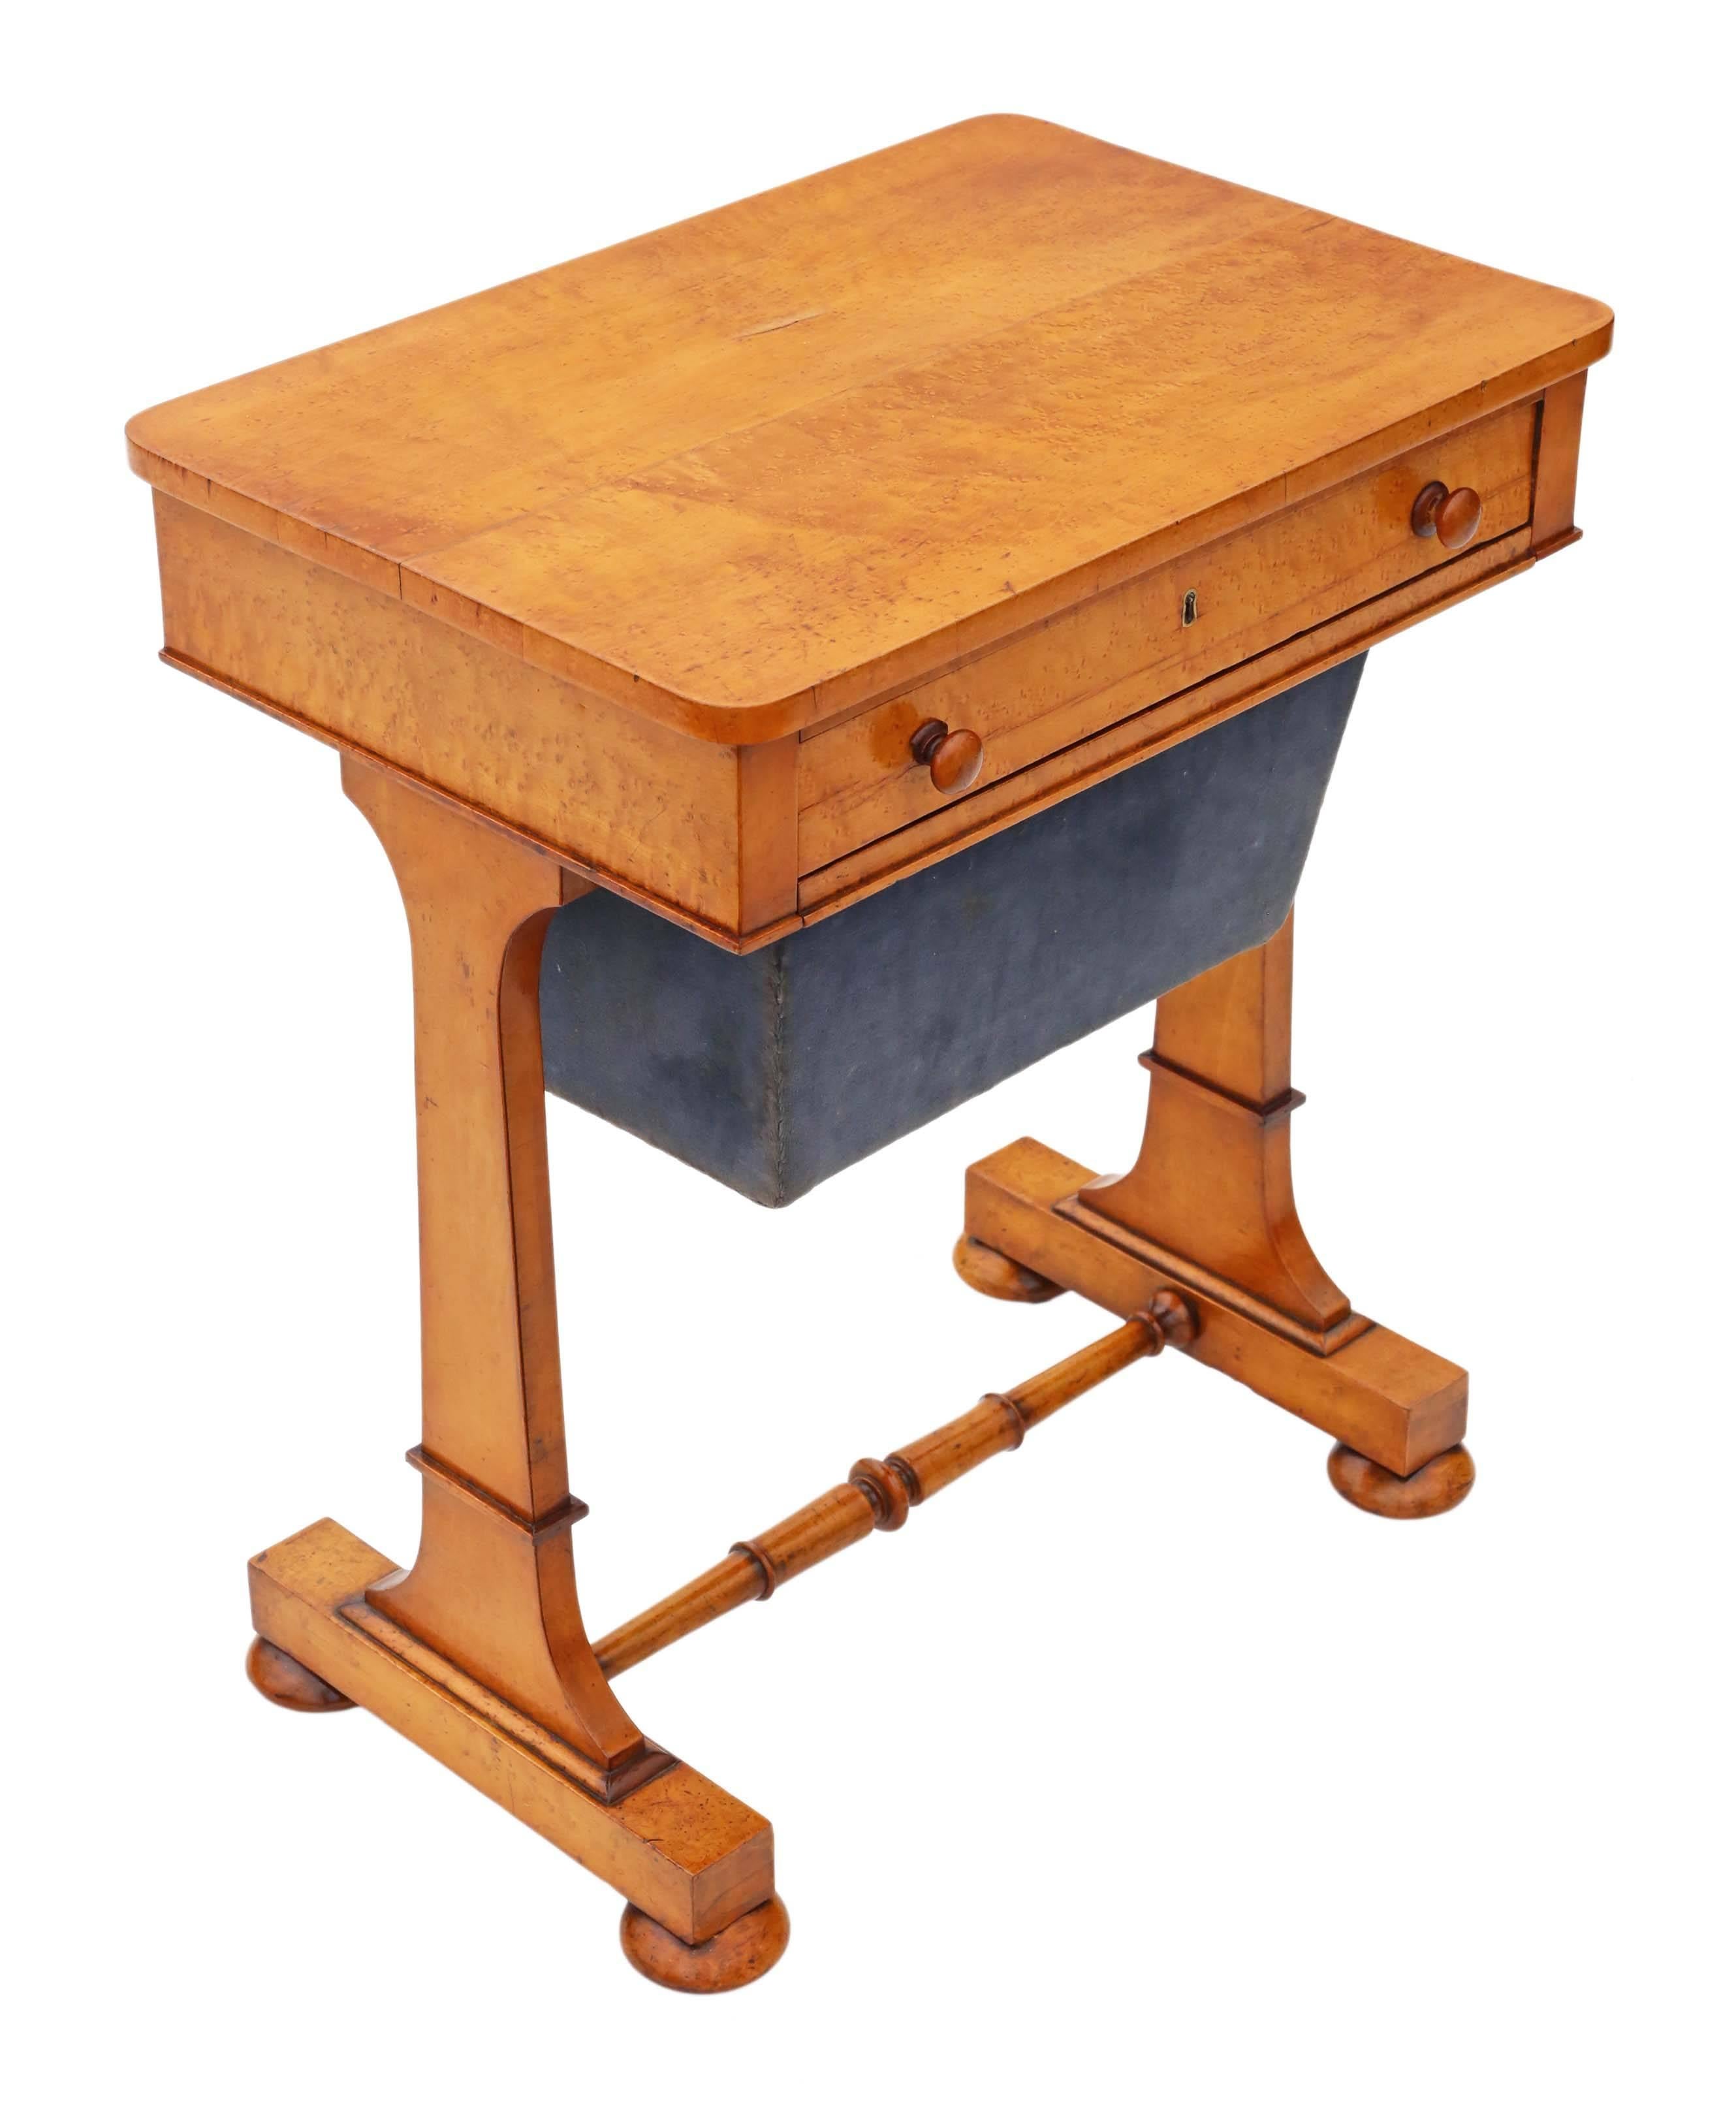 Birdseye Maple Antique William iv circa 1835 Bird's-Eye Maple Work / Sewing Box or Table For Sale